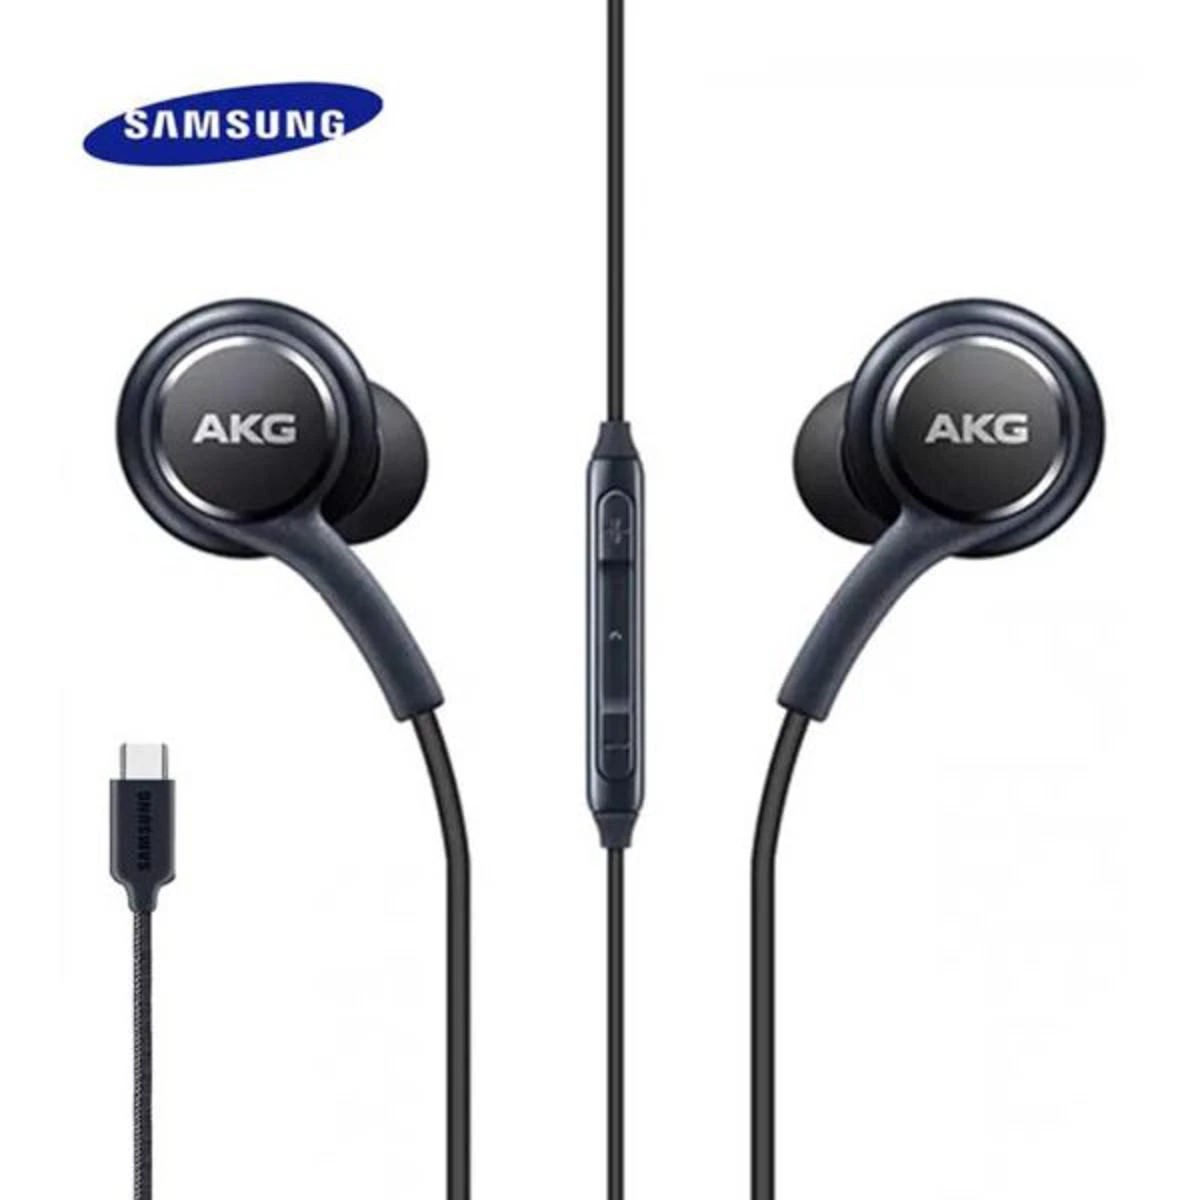 SAMSUNG AKG Earbuds Type C in-Ear Earbud Headphones with Remote & Mic - Braided - Includes Velvet Pouch - Black